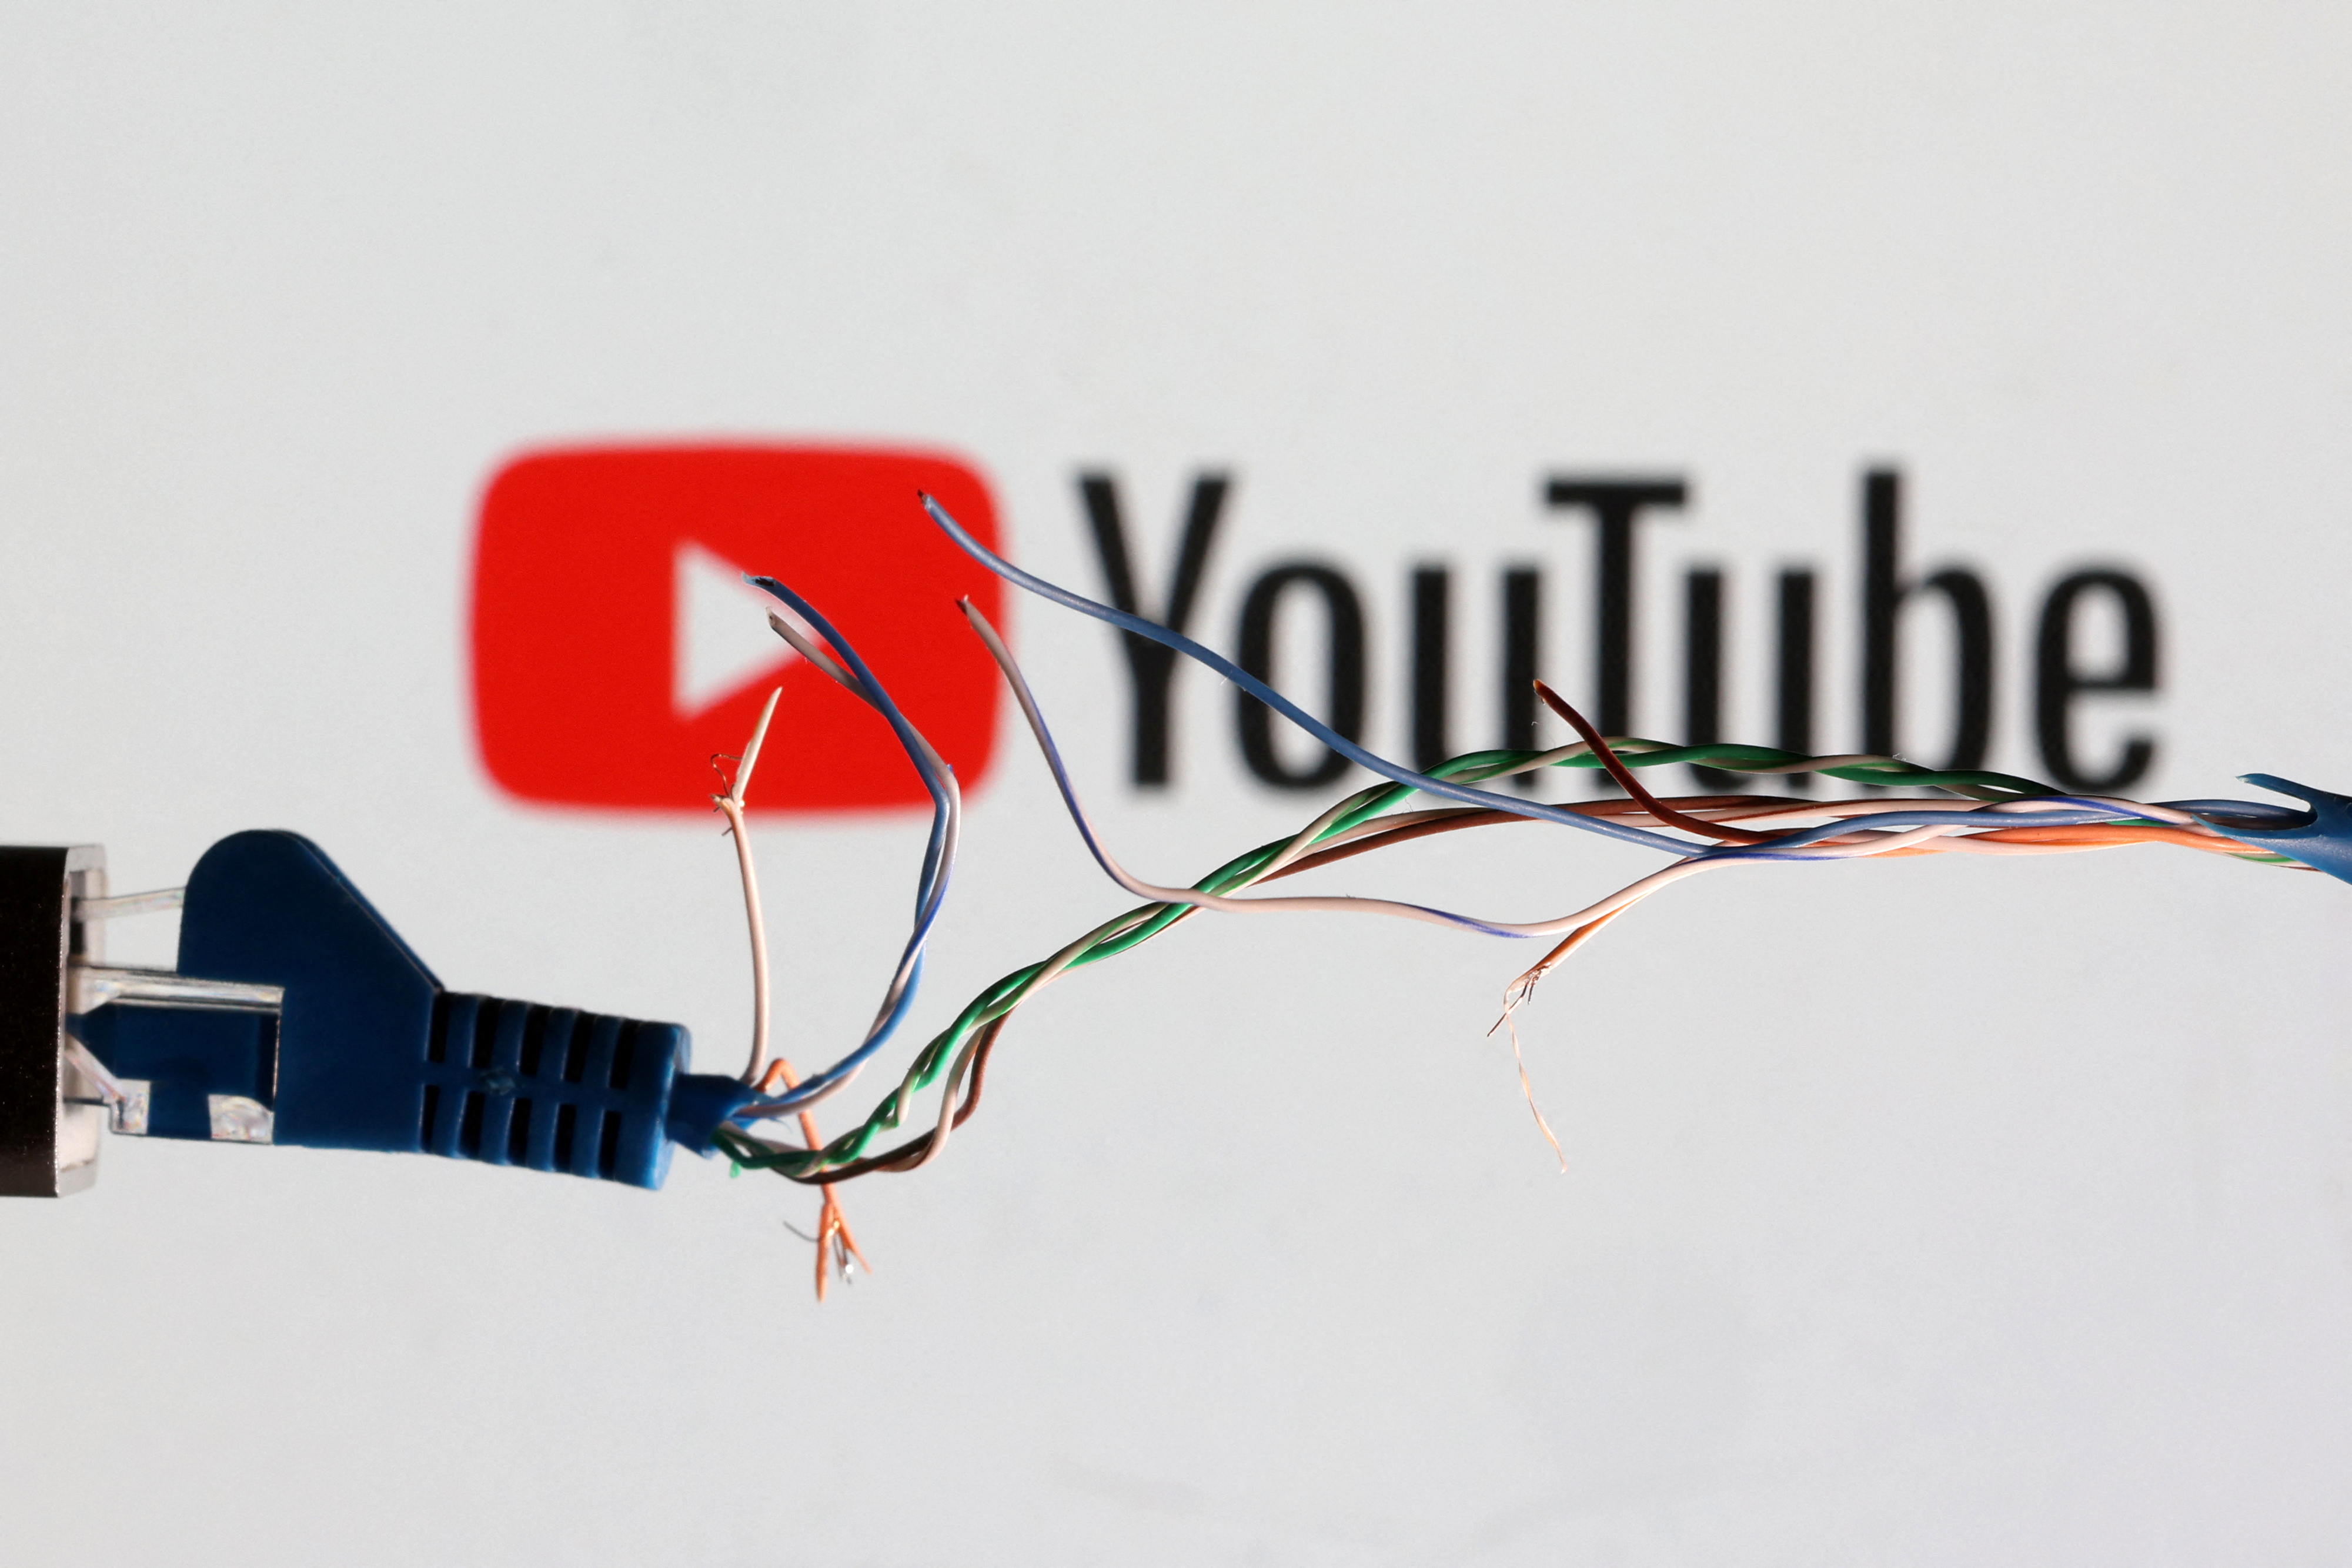 Illustration shows broken Ethernet cable and Youtube logo